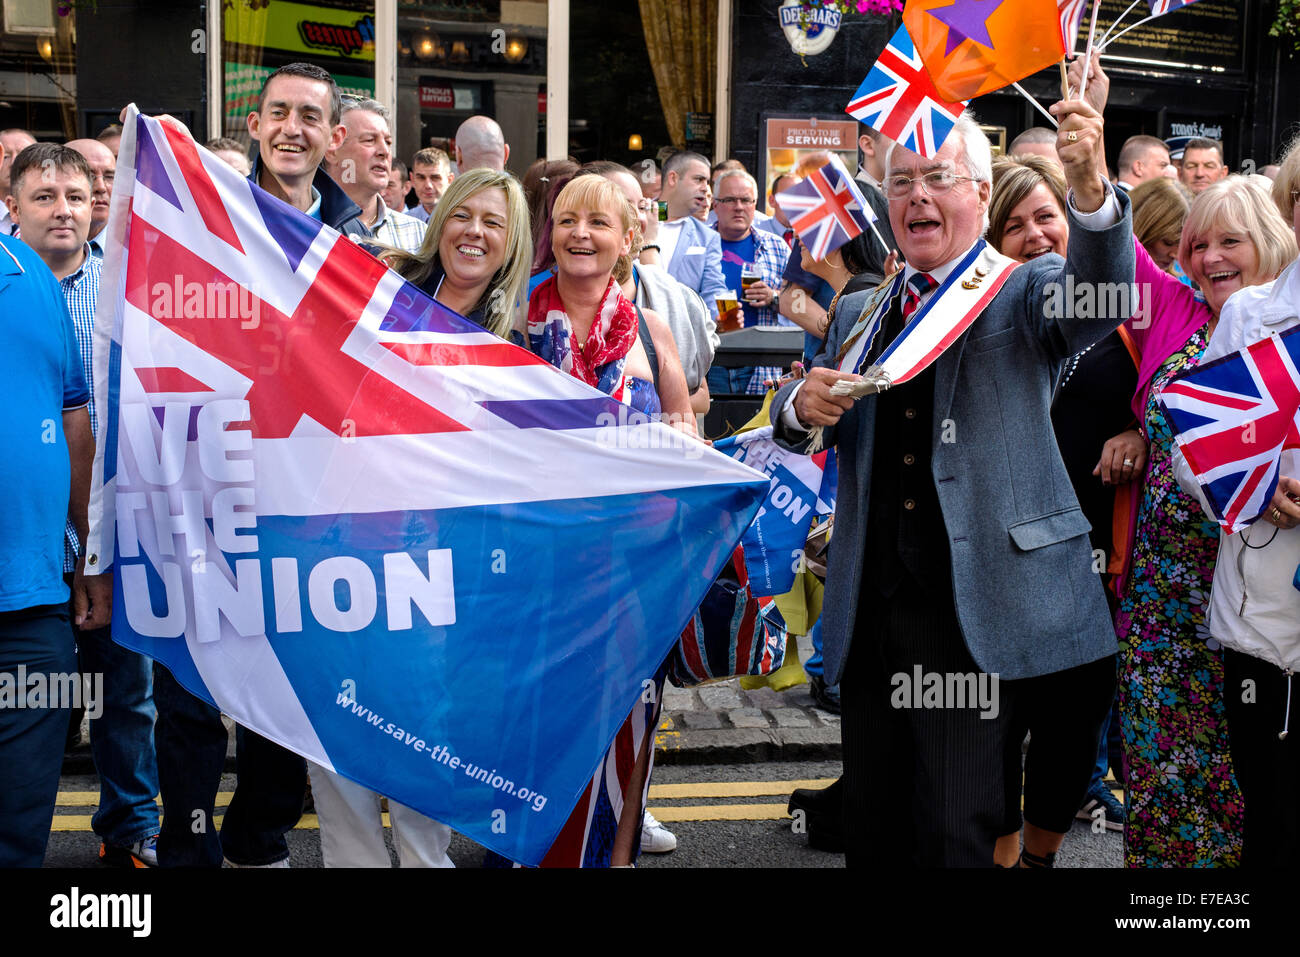 Spectators cheer on an Orange parade in support of the Union in the run up to the referendum on Scottish independence. Stock Photo